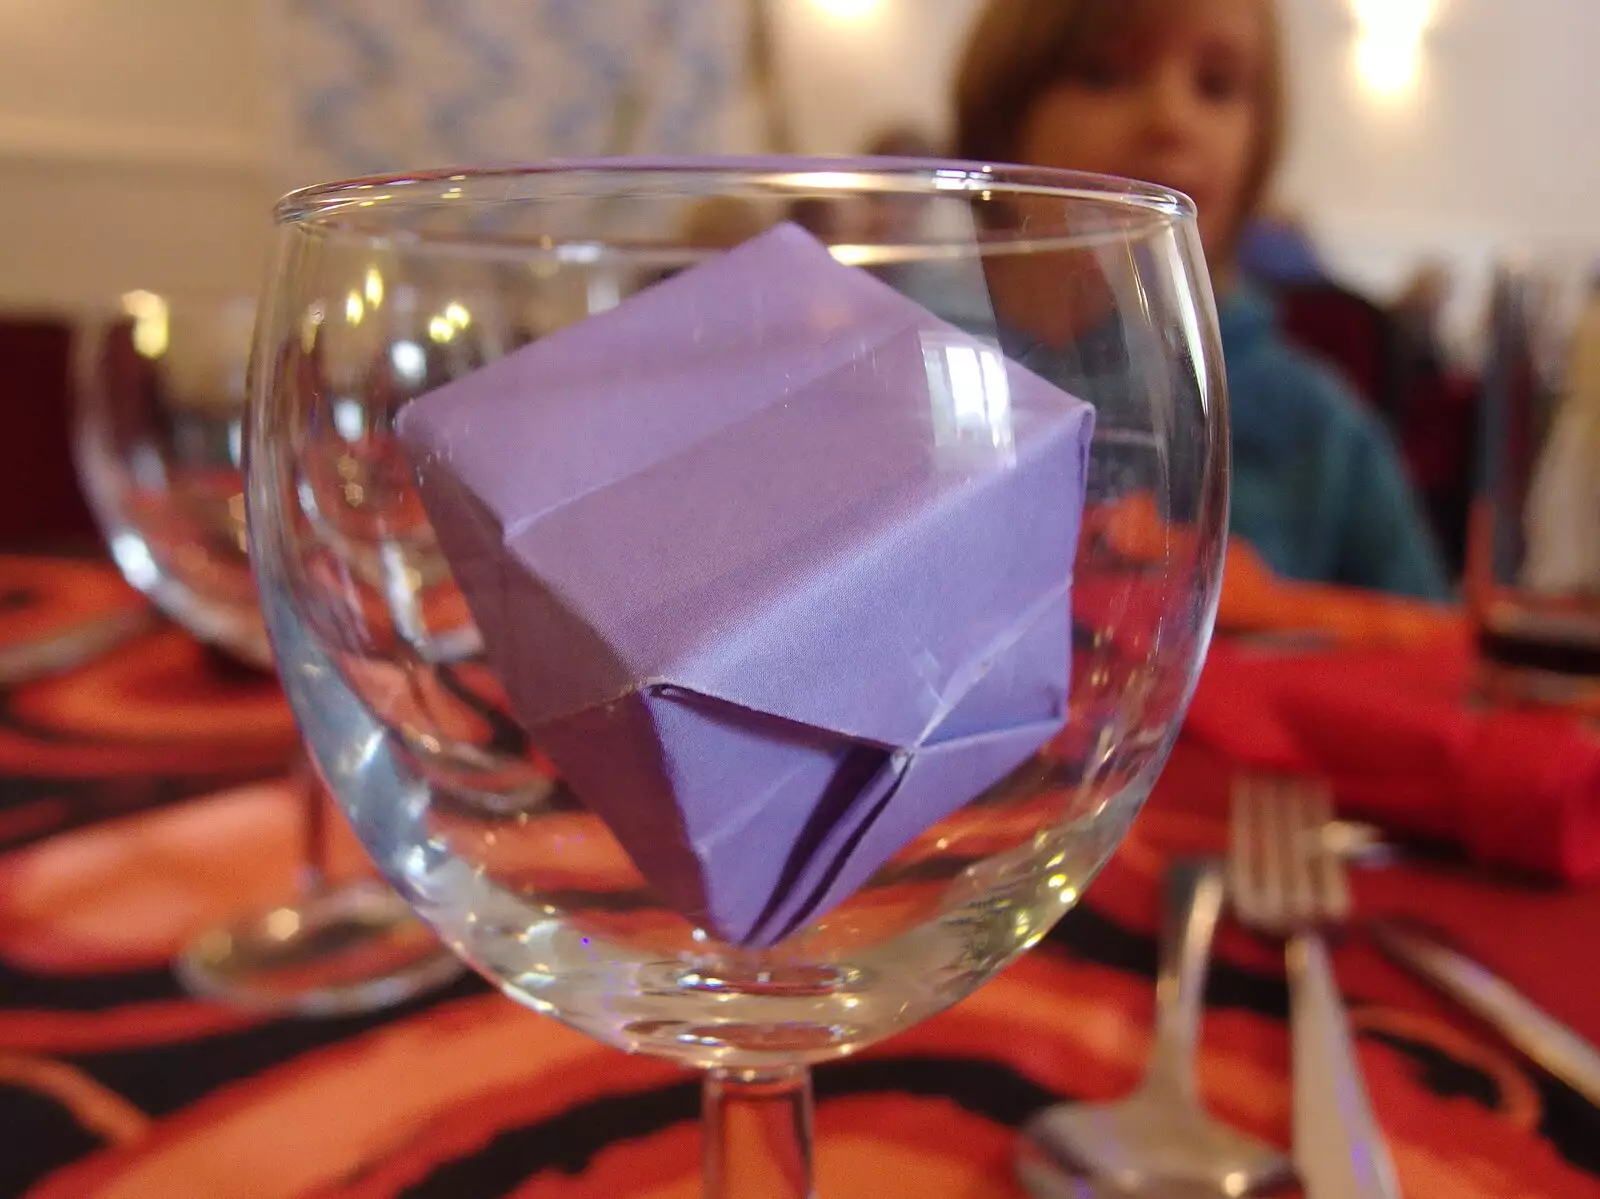 One of Fred's Origami boxes in a wine glass, from Sunday Lunch at the Village Hall, Brome, Suffolk - 10th October 2021